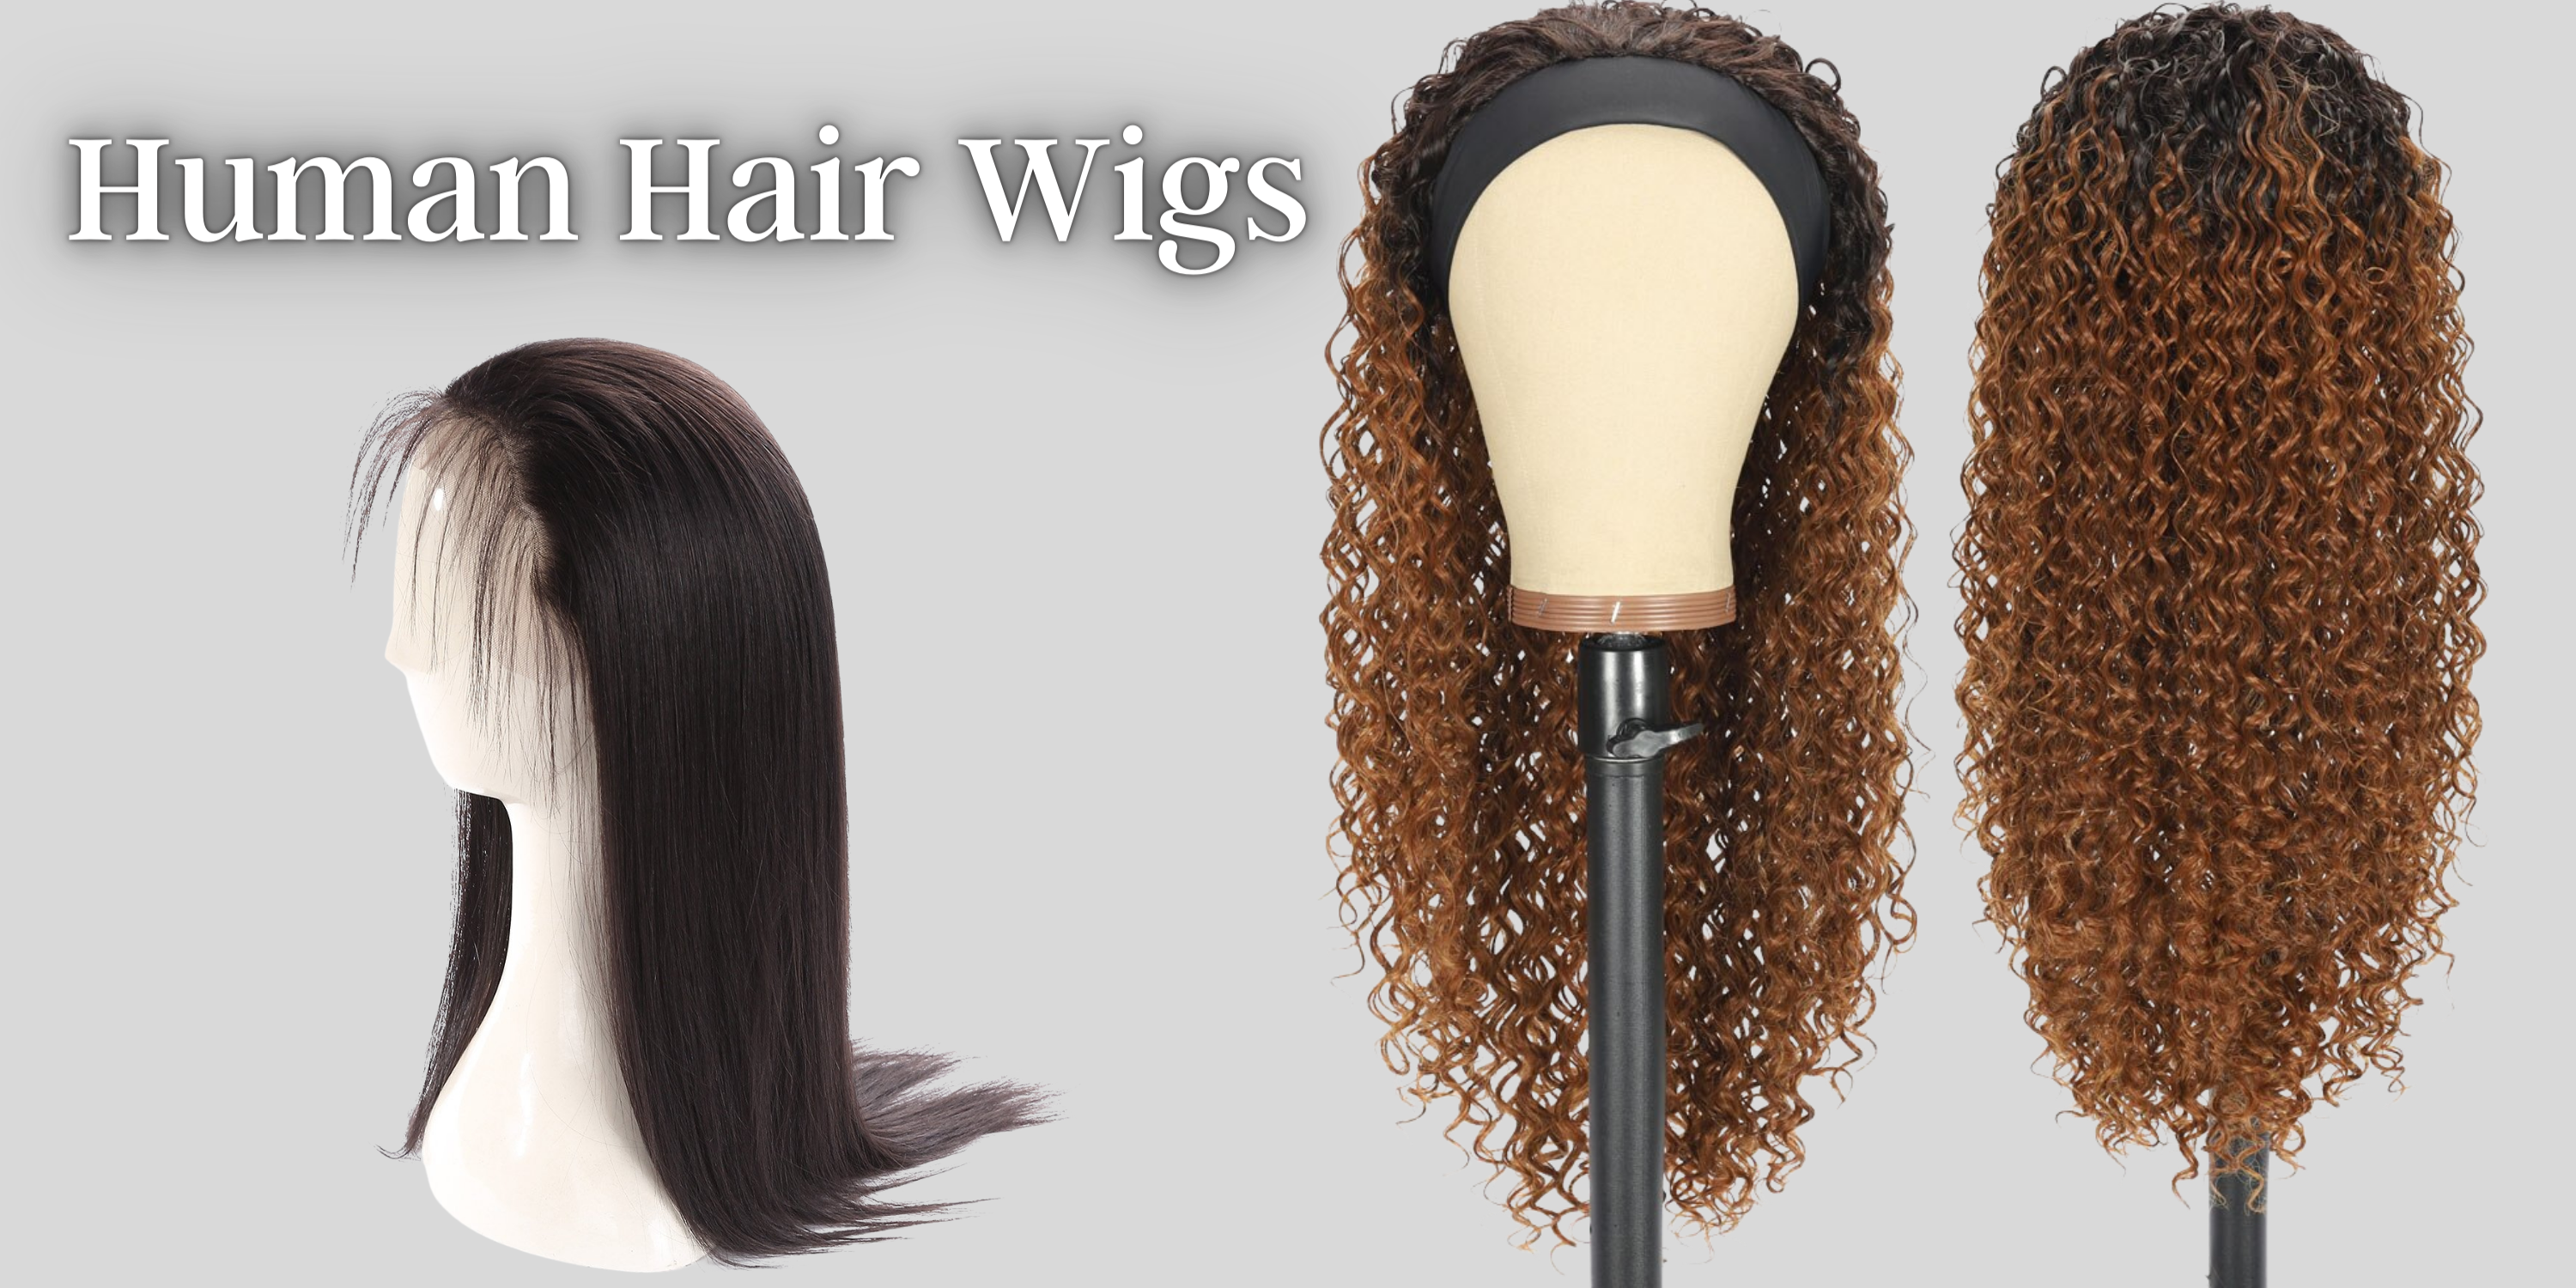 Human hair wigs: 10 Hidden Useful Tips That Will Make Your Life Easier